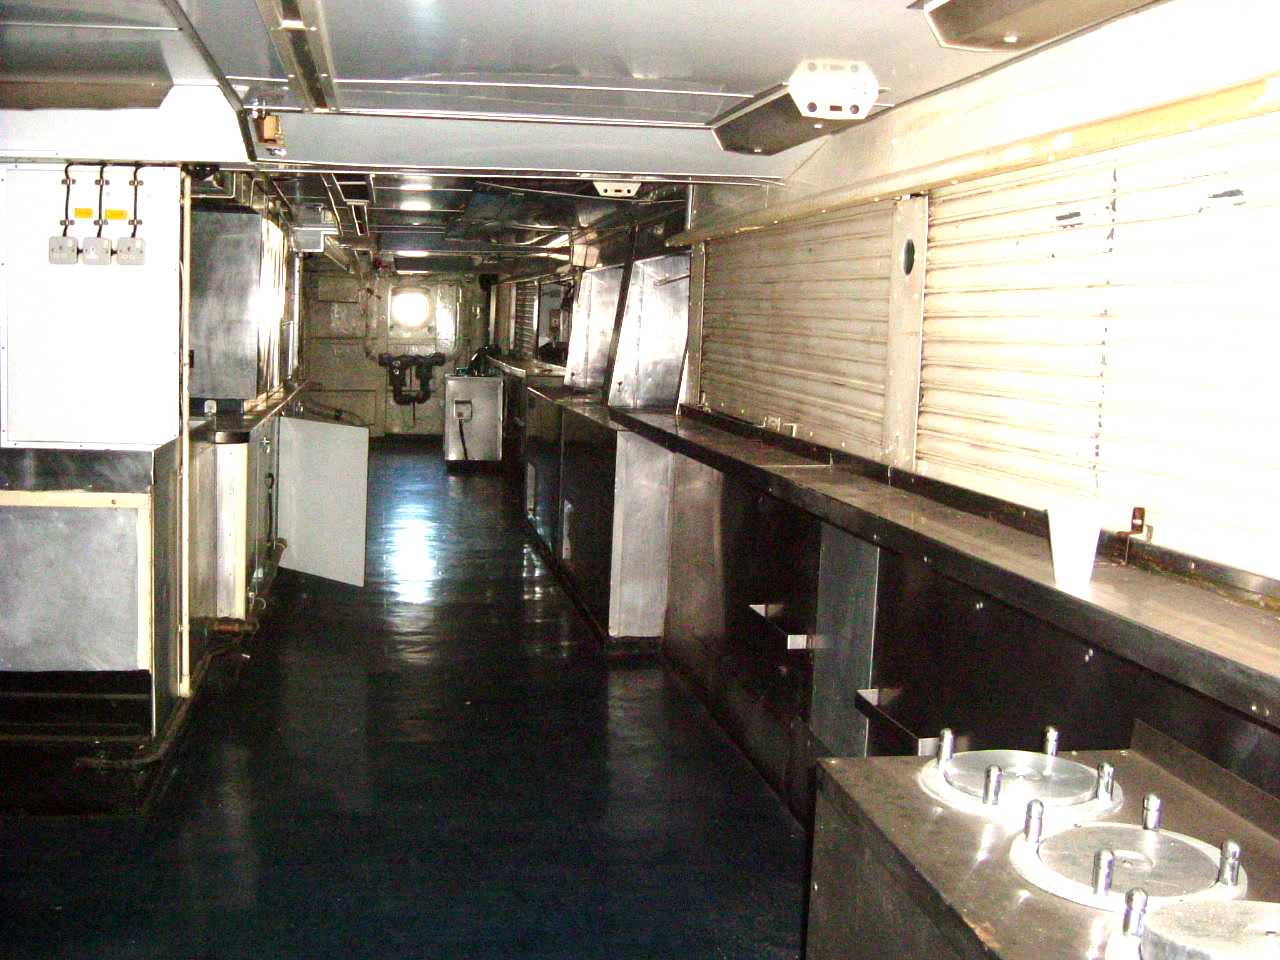 Here are the food serving lines on the HMS Intrepid